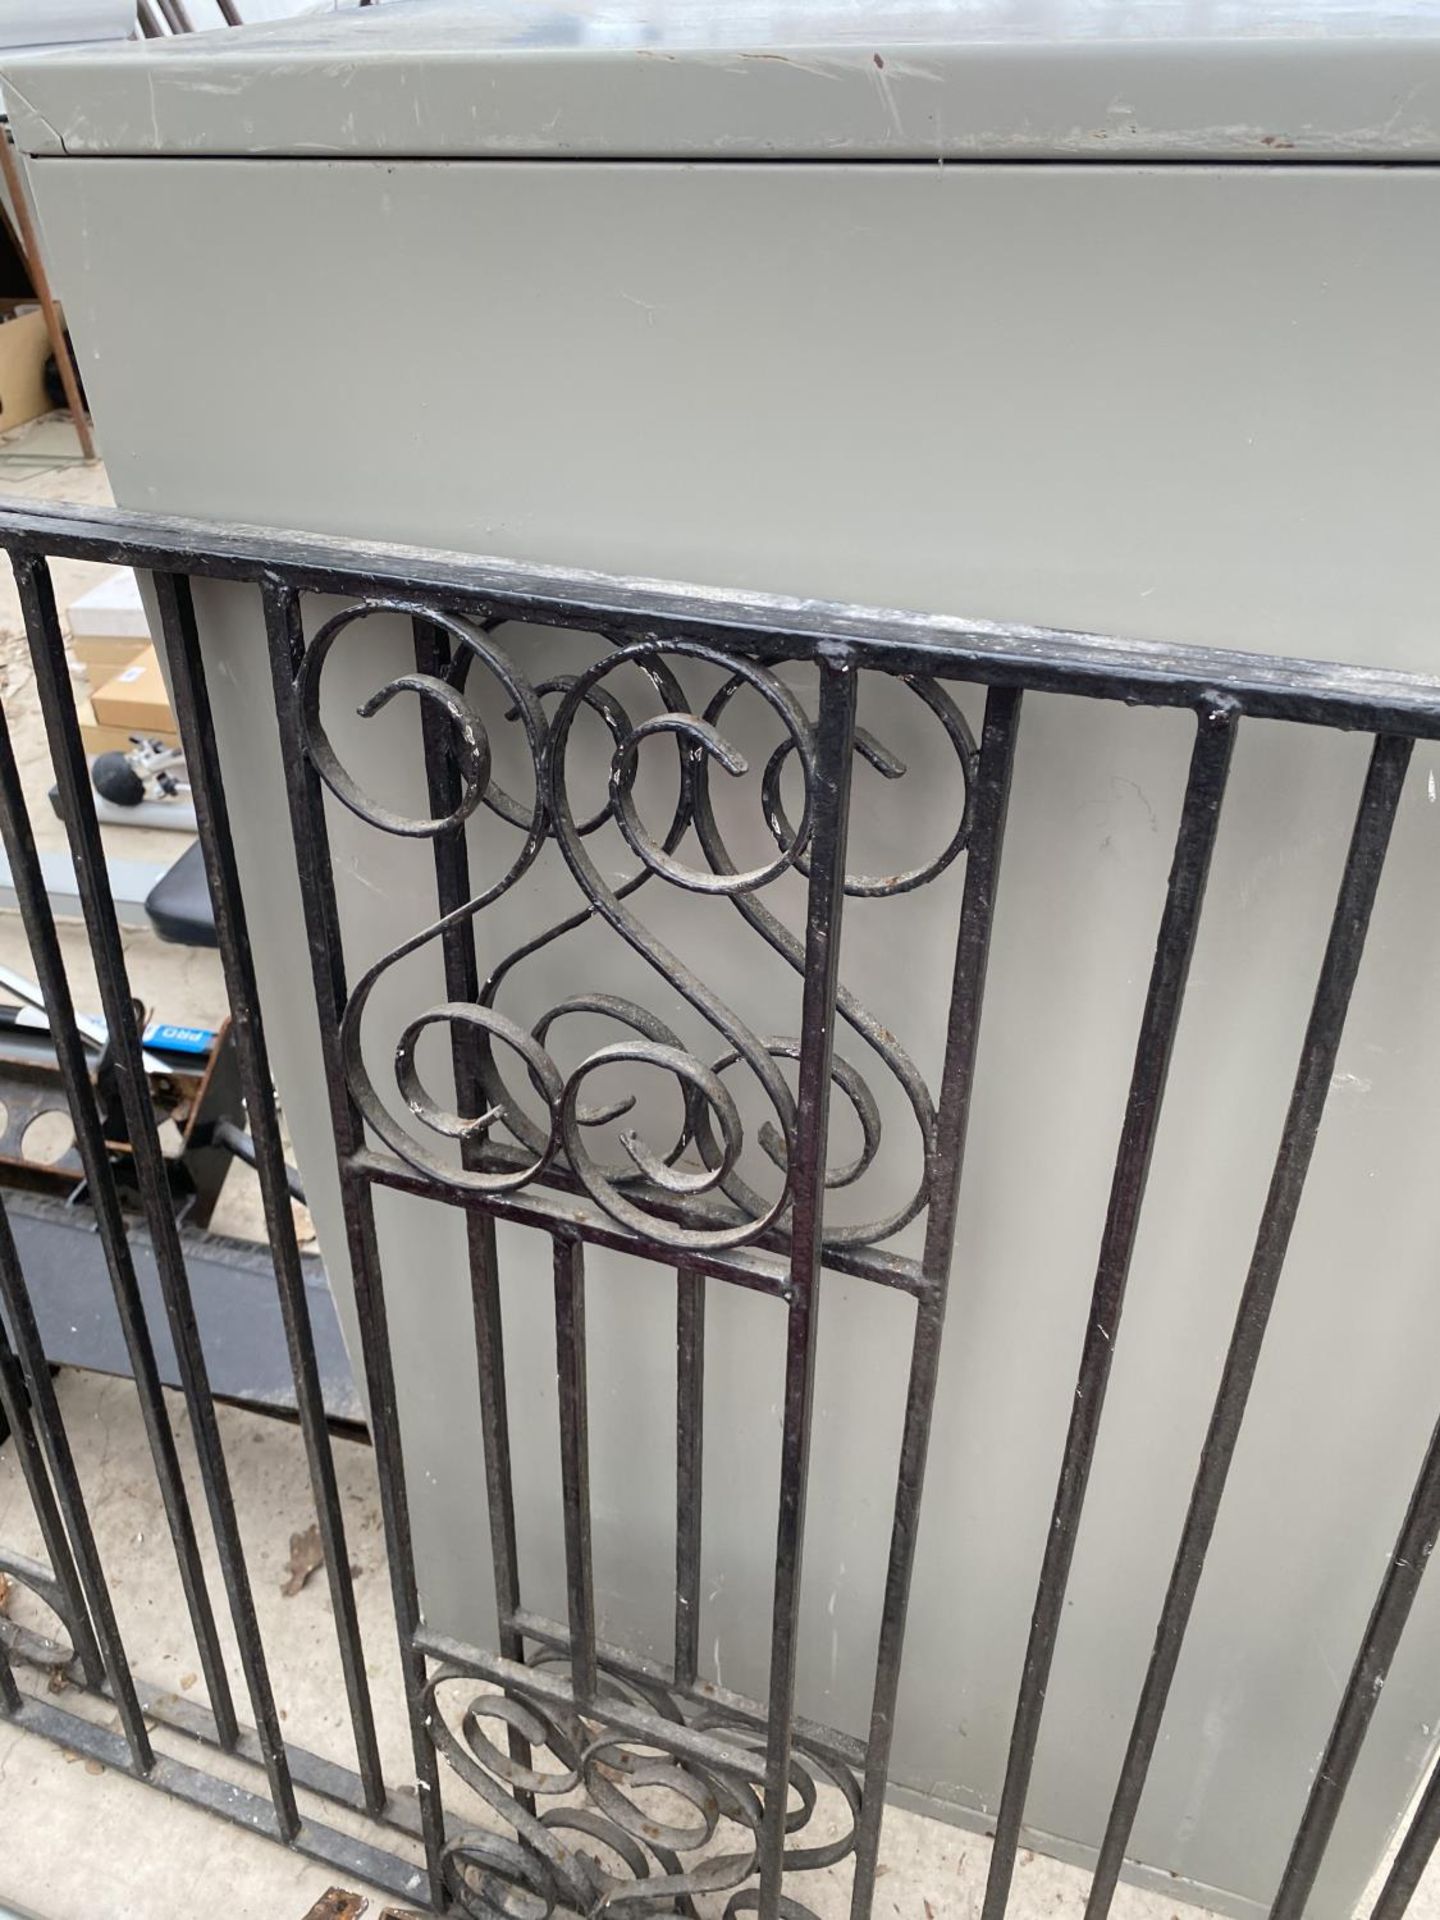 A PAIR OF DECORATIVE WROUGHT IRON GARDEN GATES - Image 2 of 3